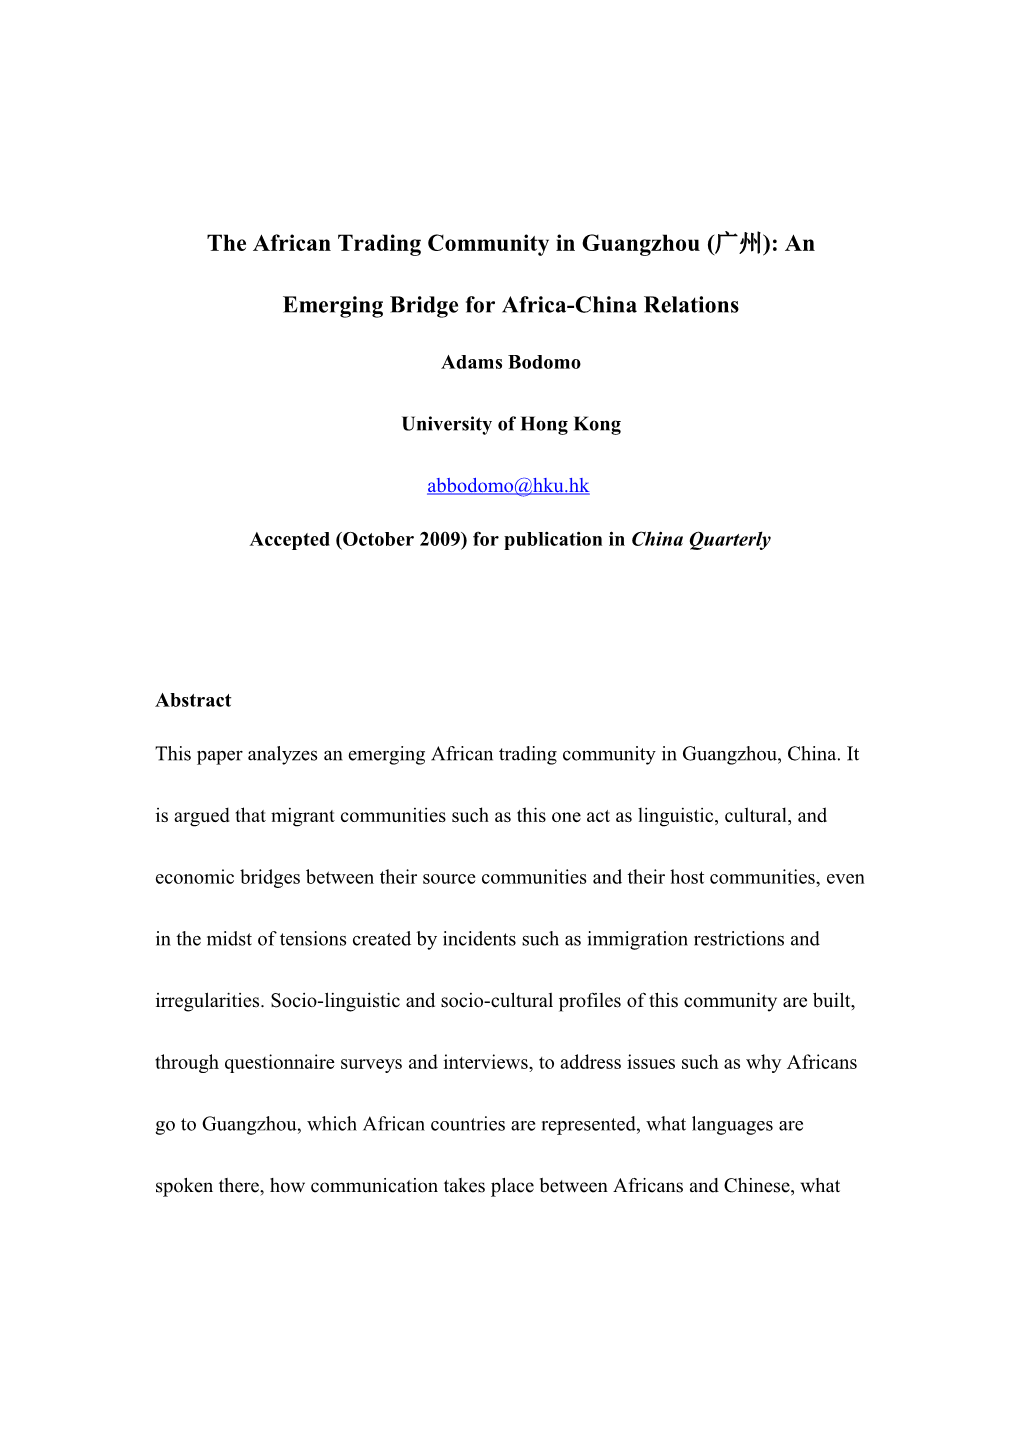 The African Trading Community in Guangzhou ( 州): an Emerging Bridge for Africa-China Relations